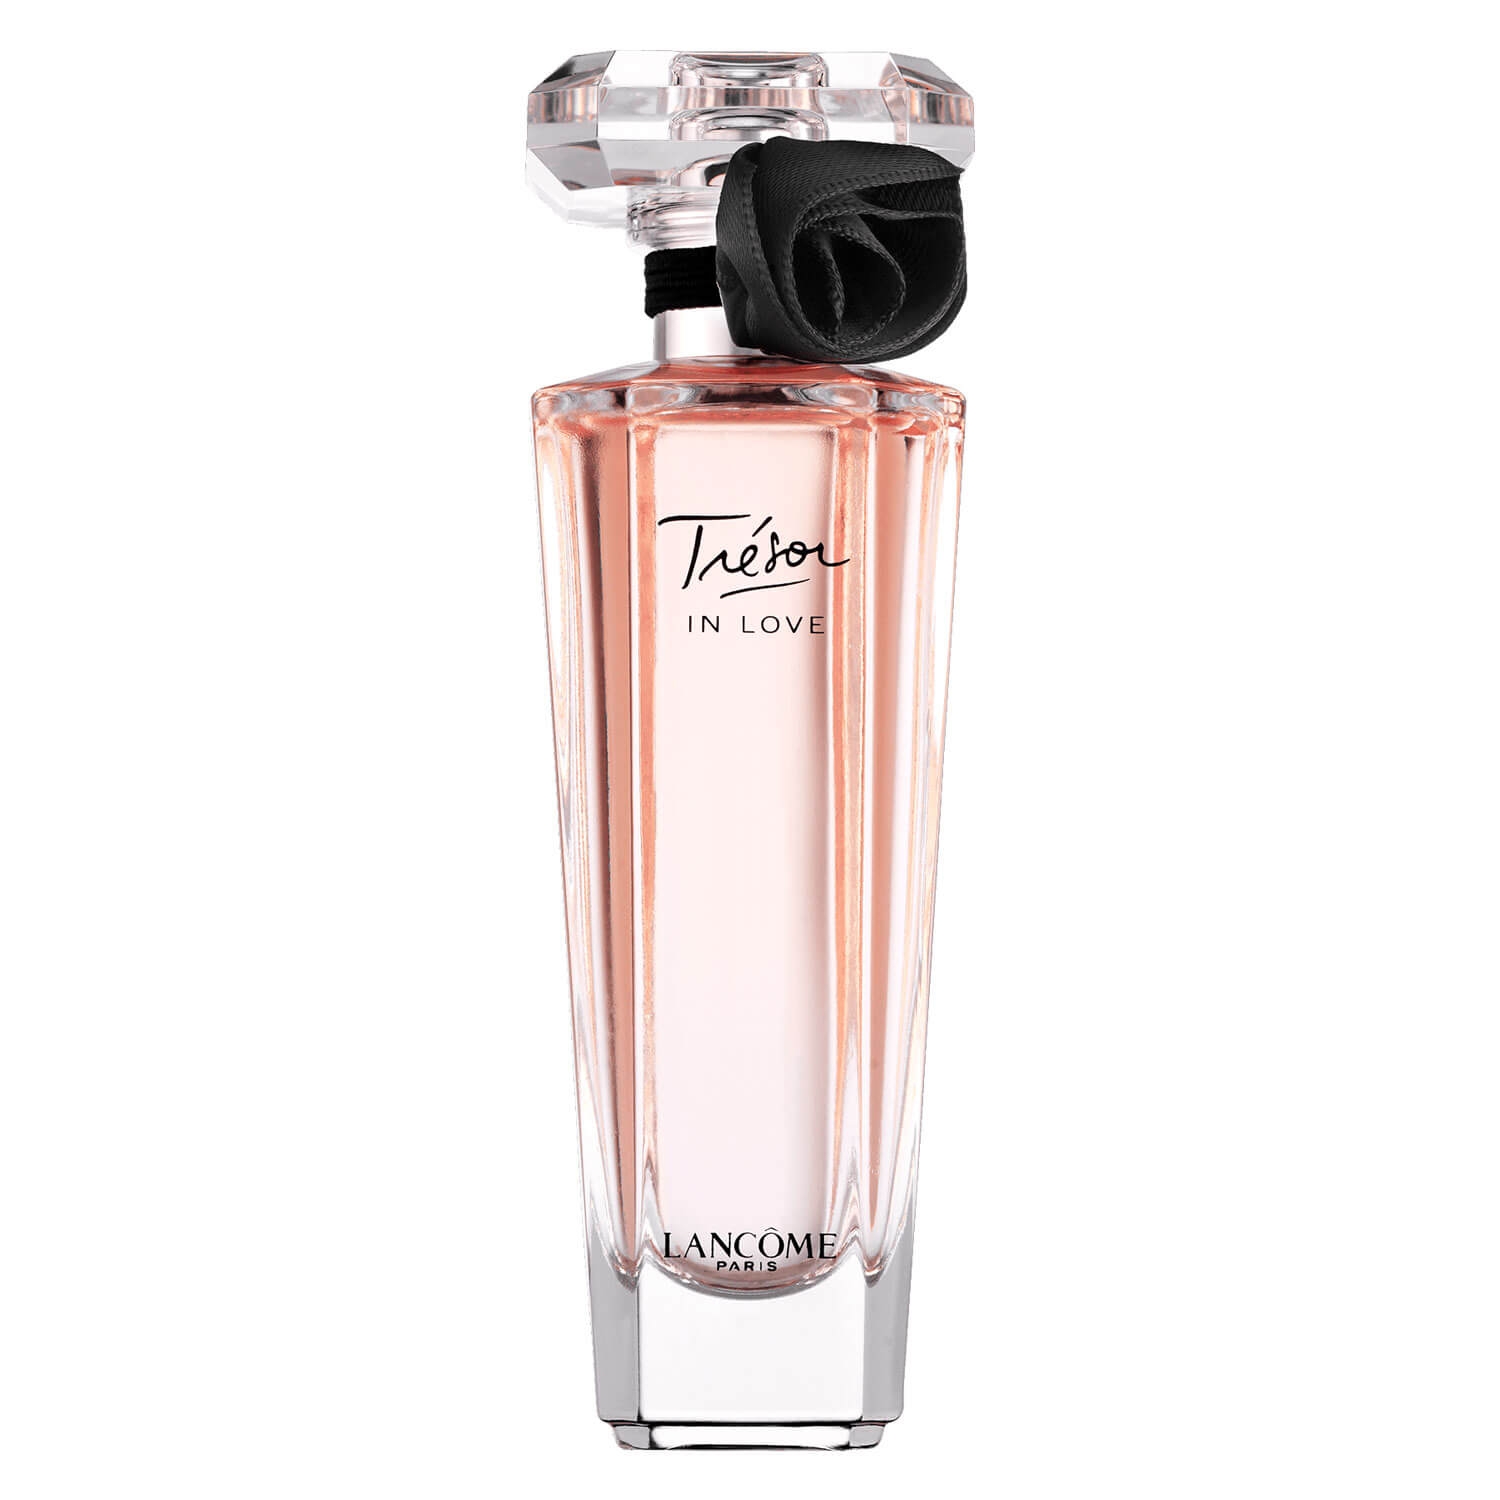 Product image from Trésor - In Love EdP